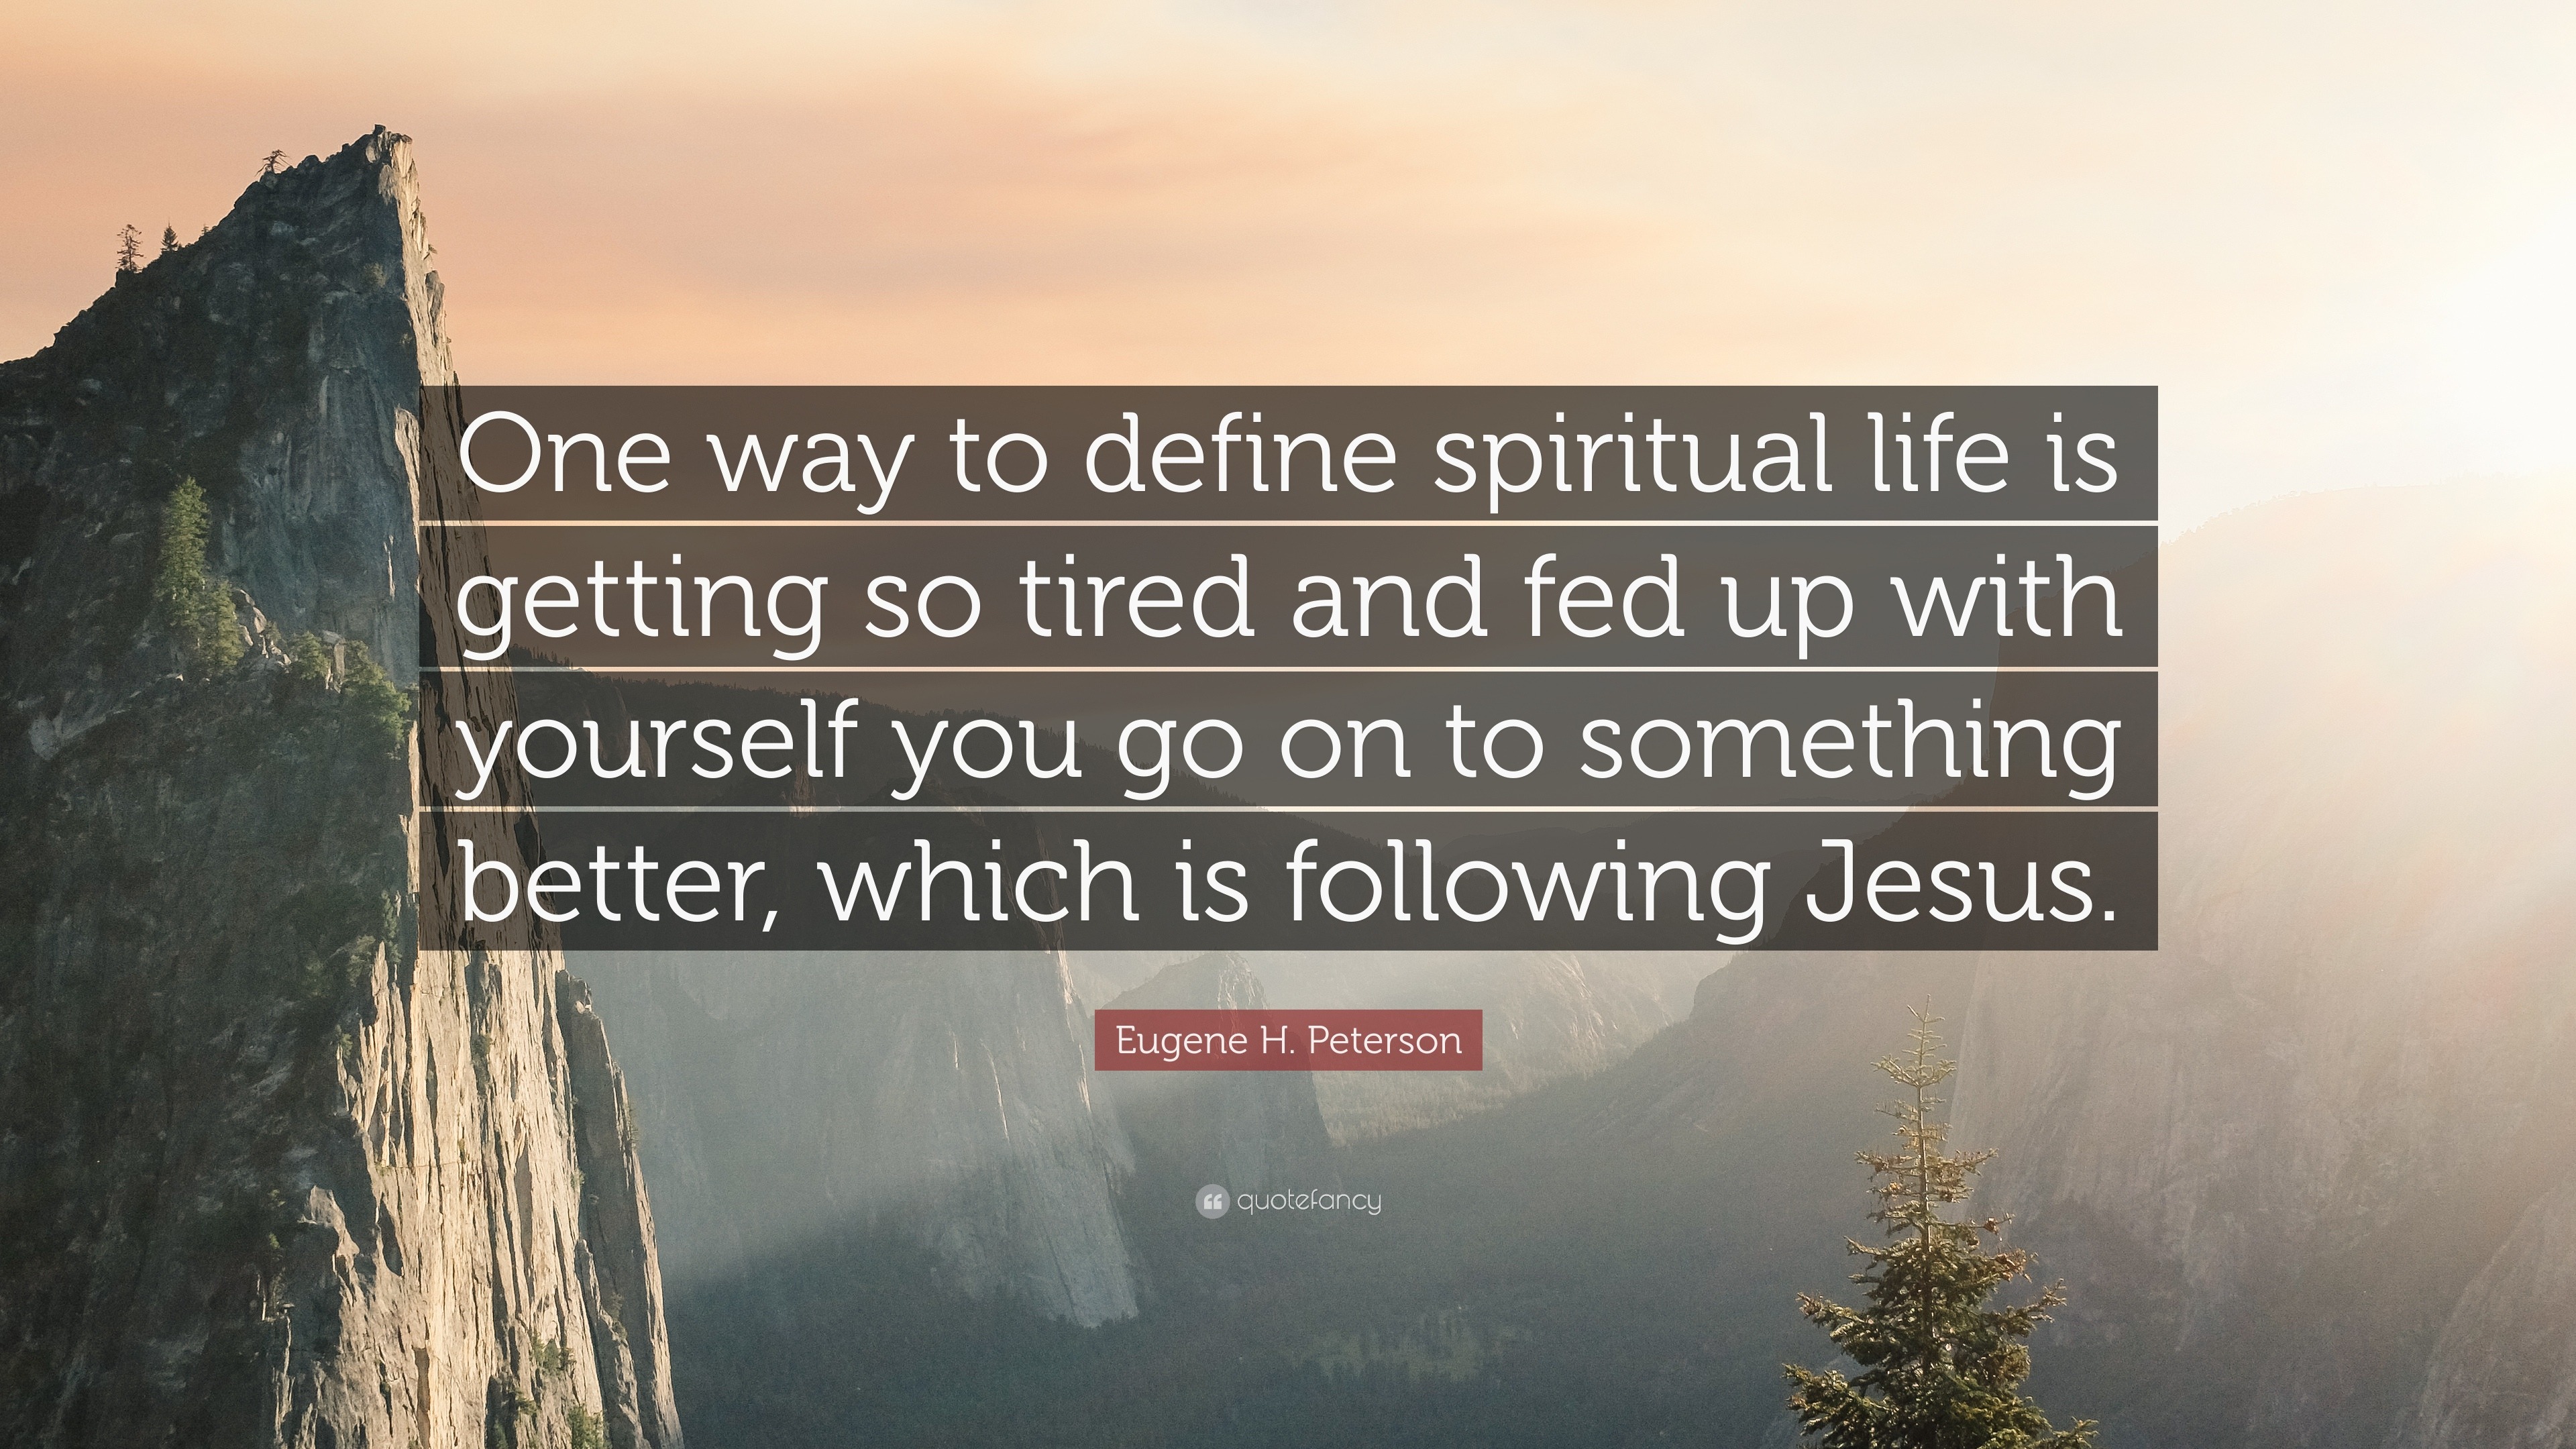 398365-Eugene-H-Peterson-Quote-One-way-to-define-spiritual-life-is.jpg